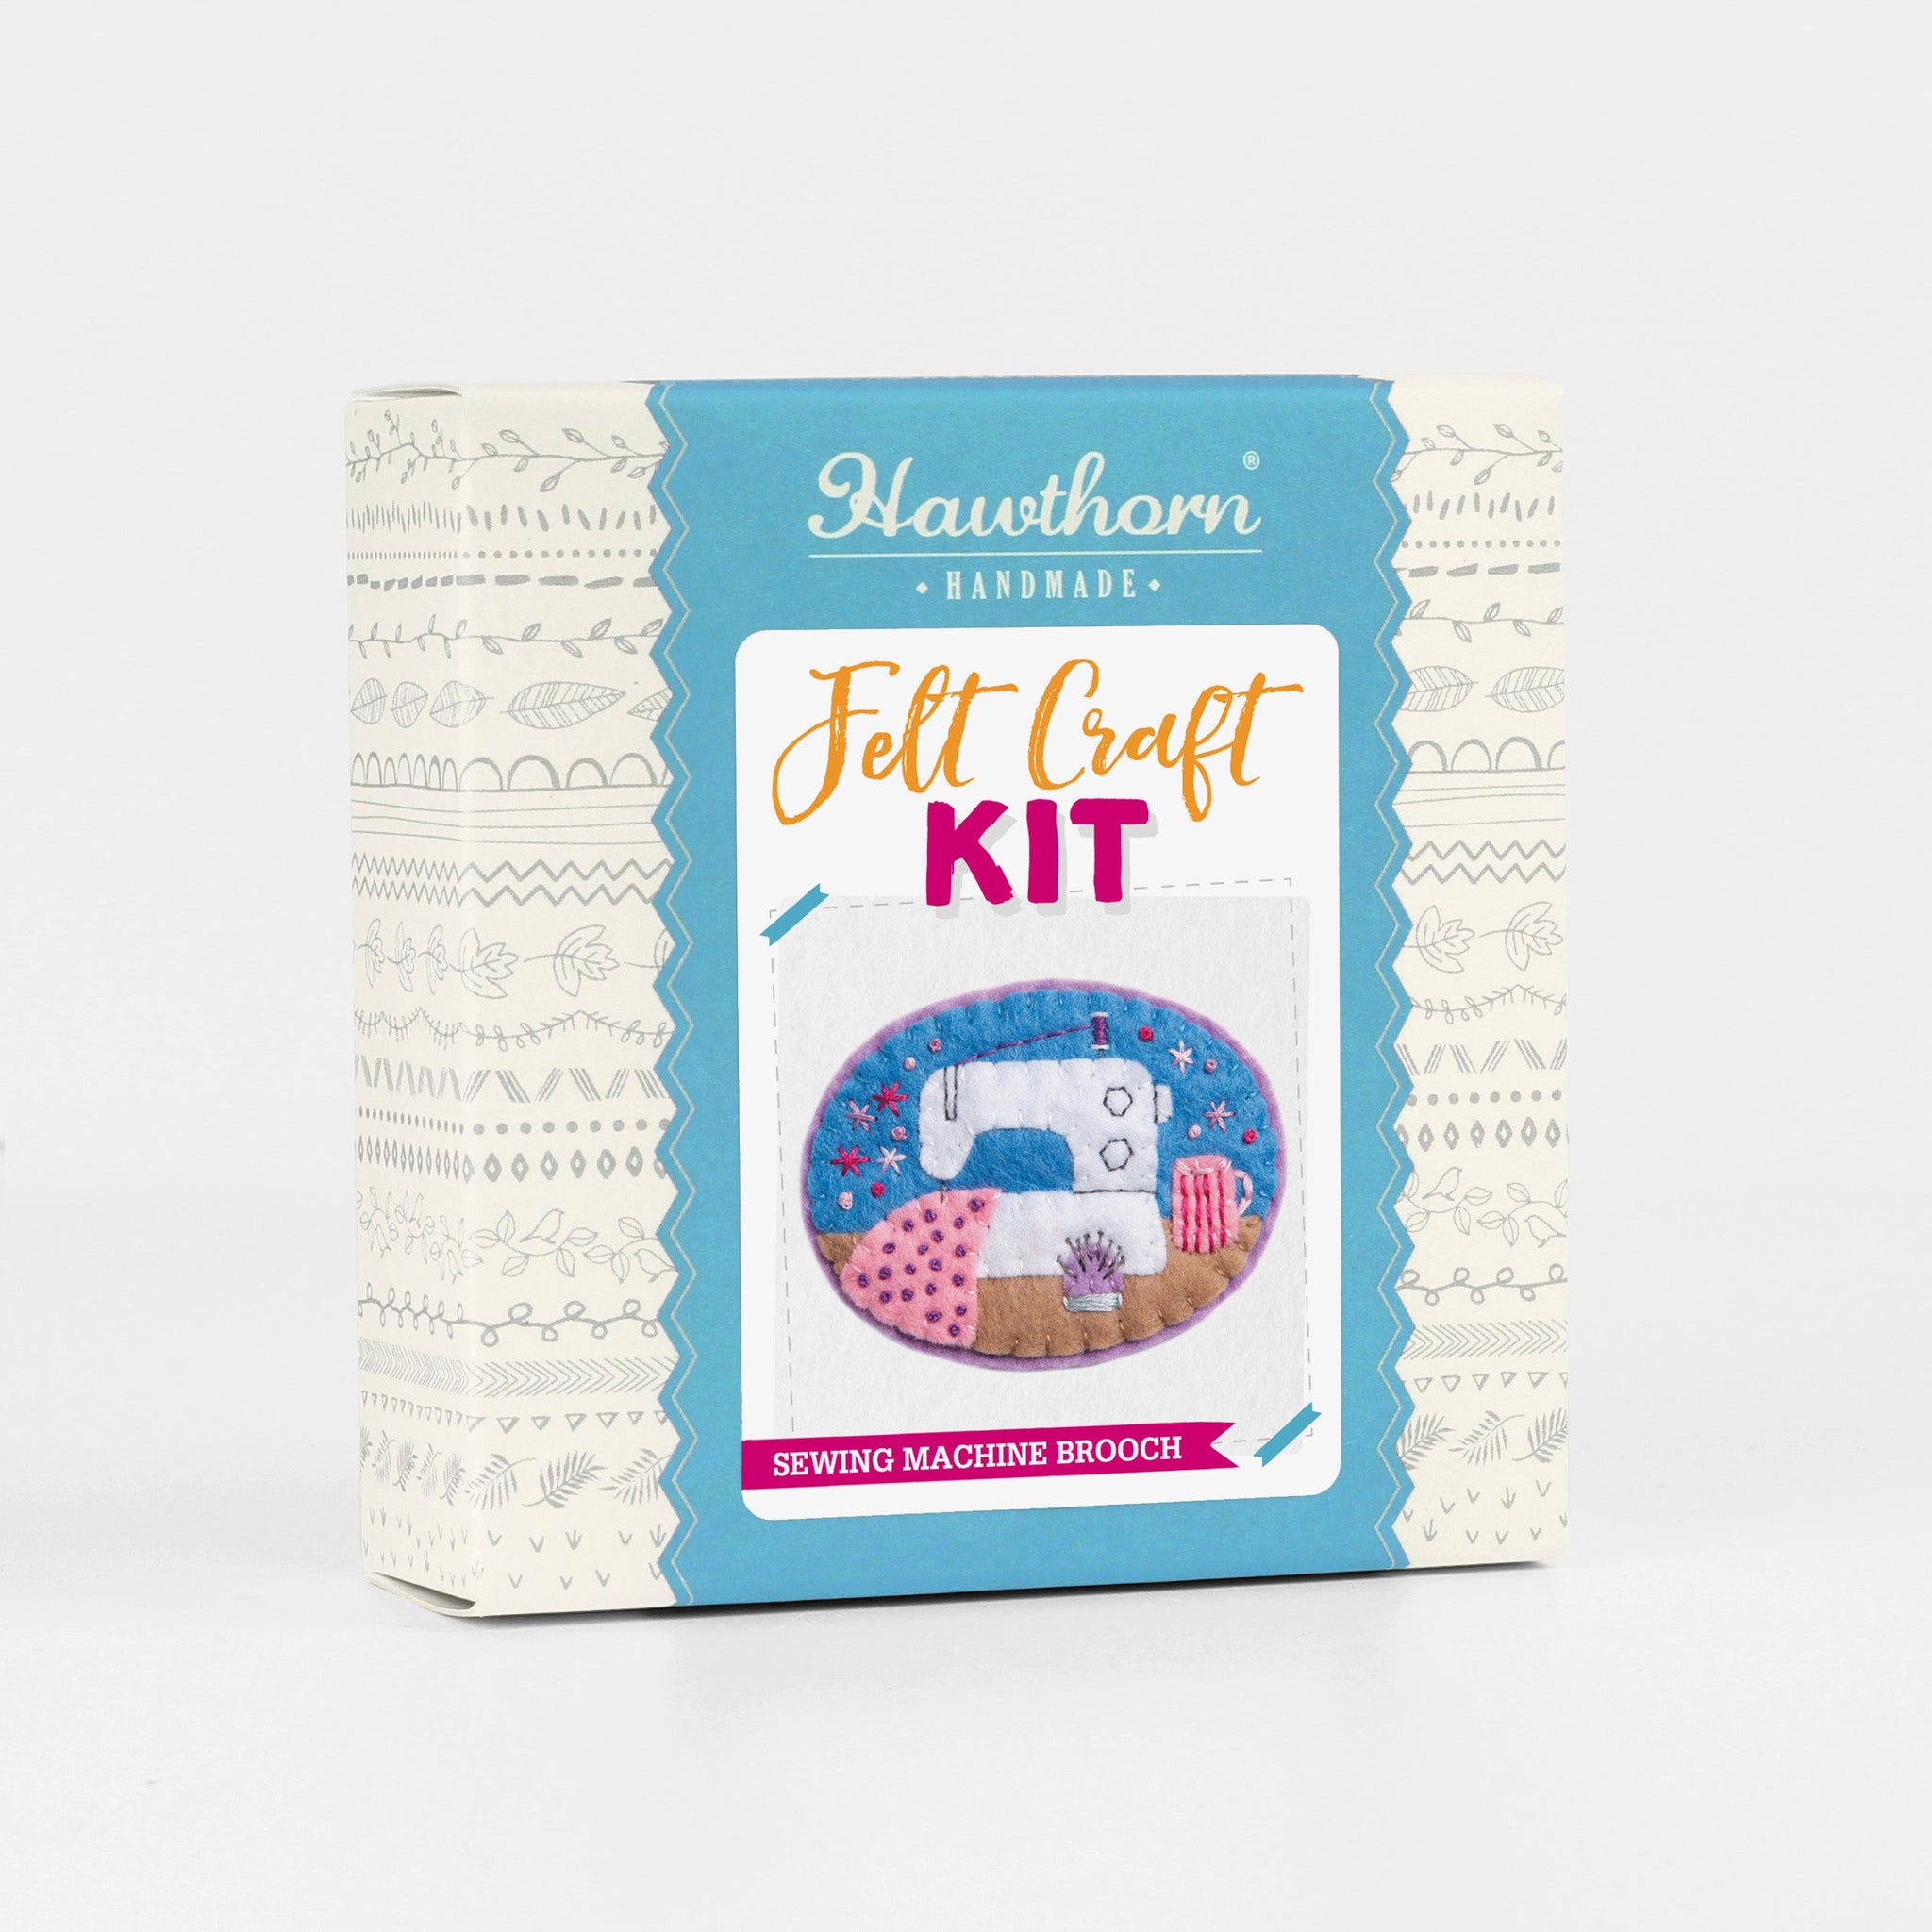 Sewing Craft Kits for Adults